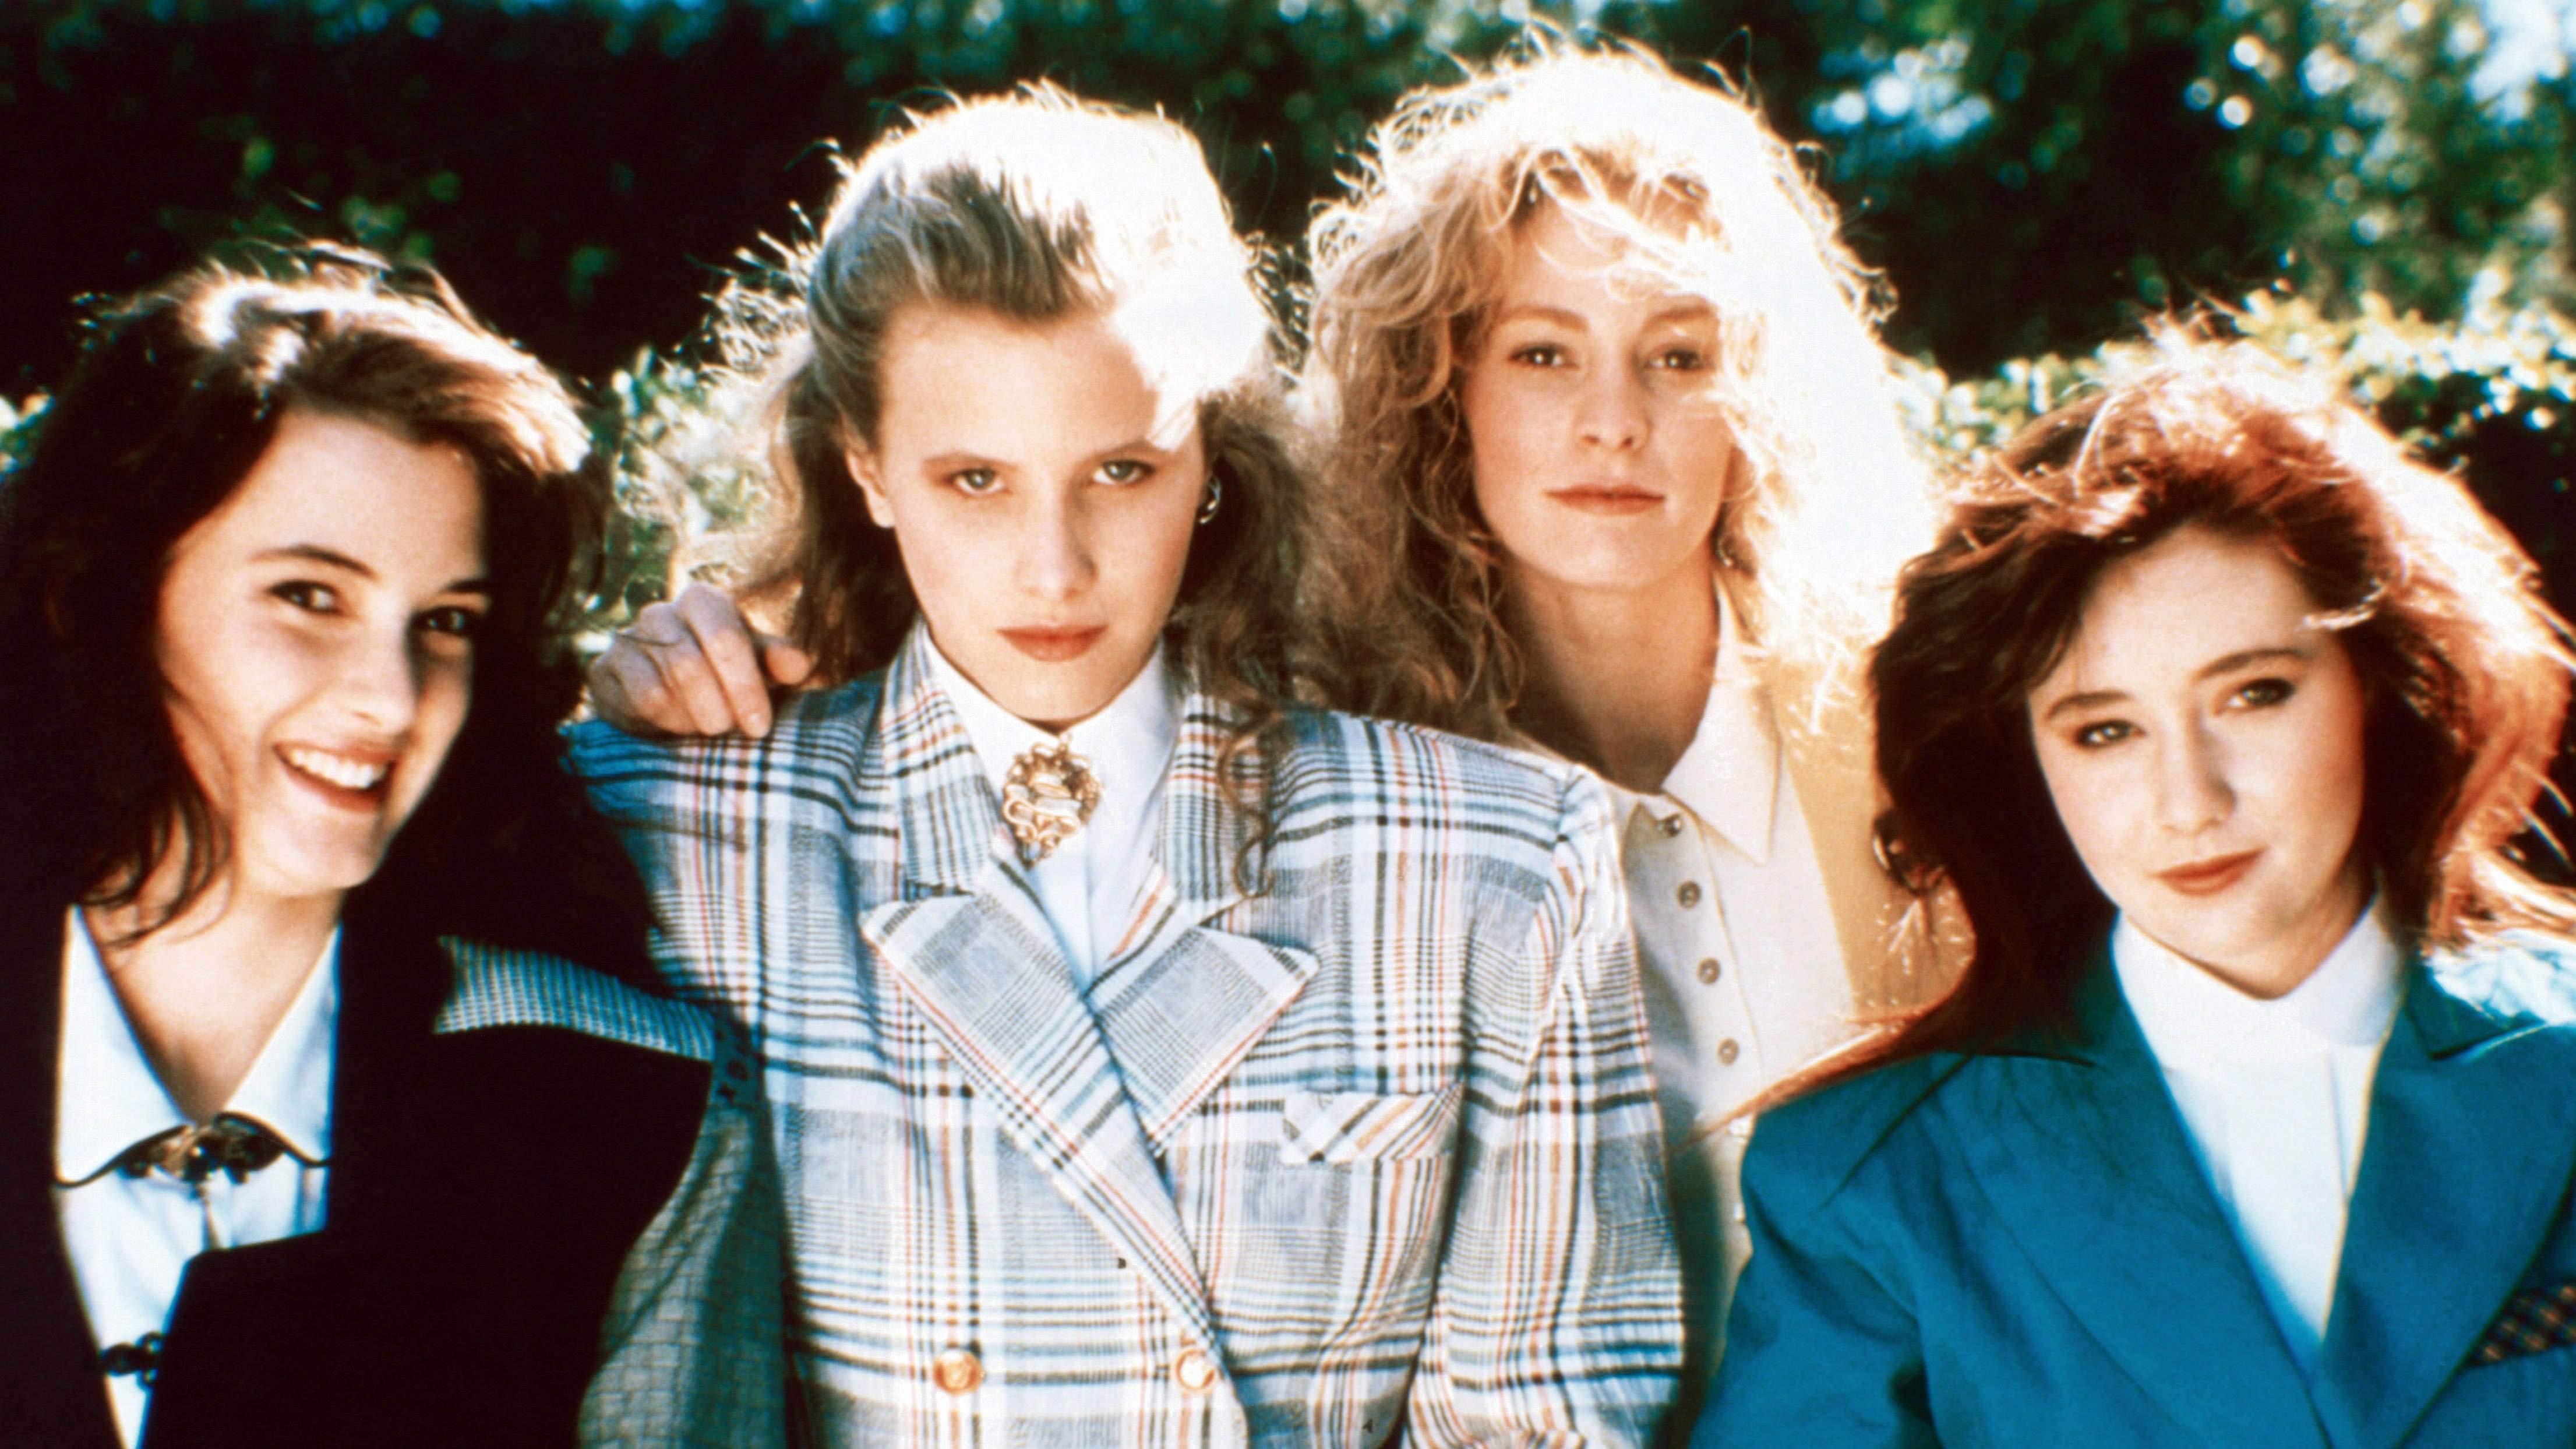 Heathers: An '80s Dance Party